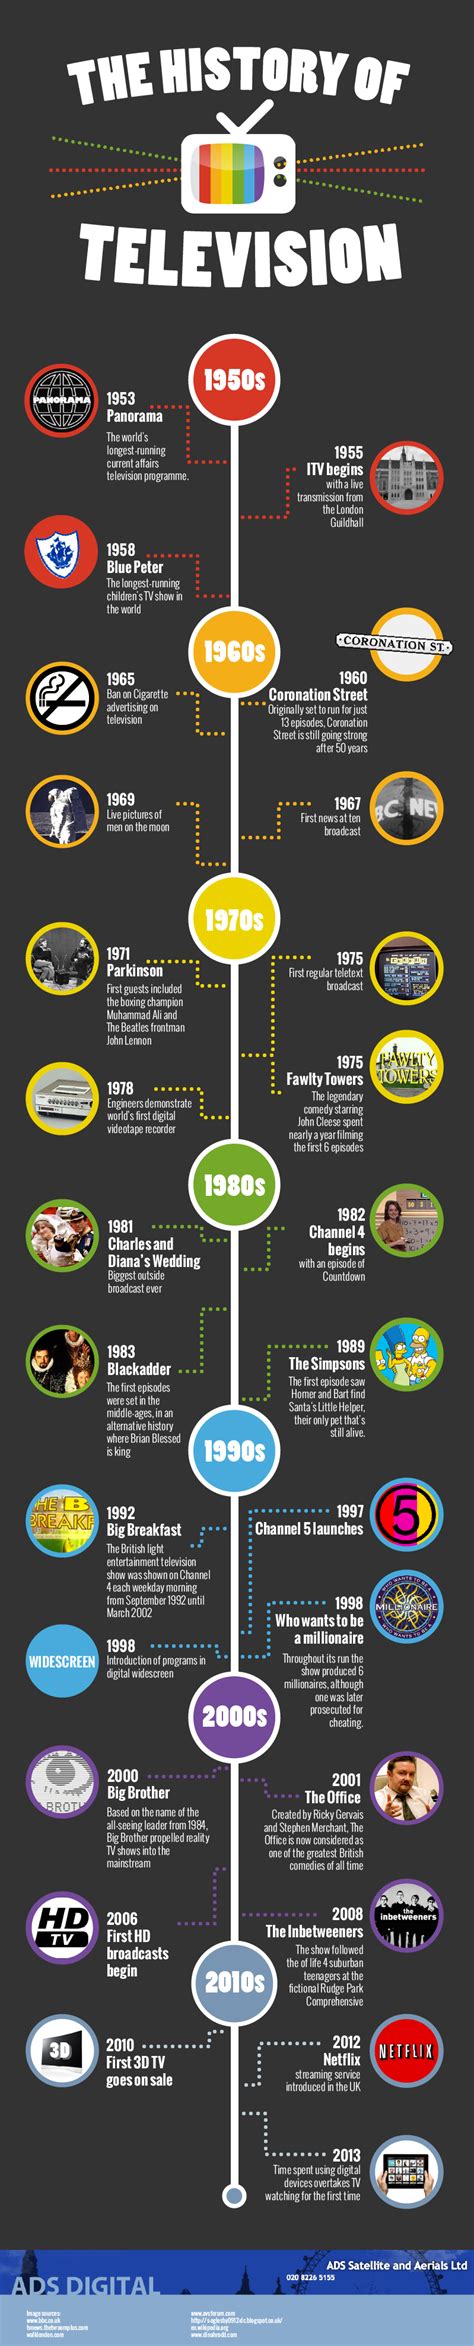 The History Of Television Infographic History Of Television Infographic Timeline Design